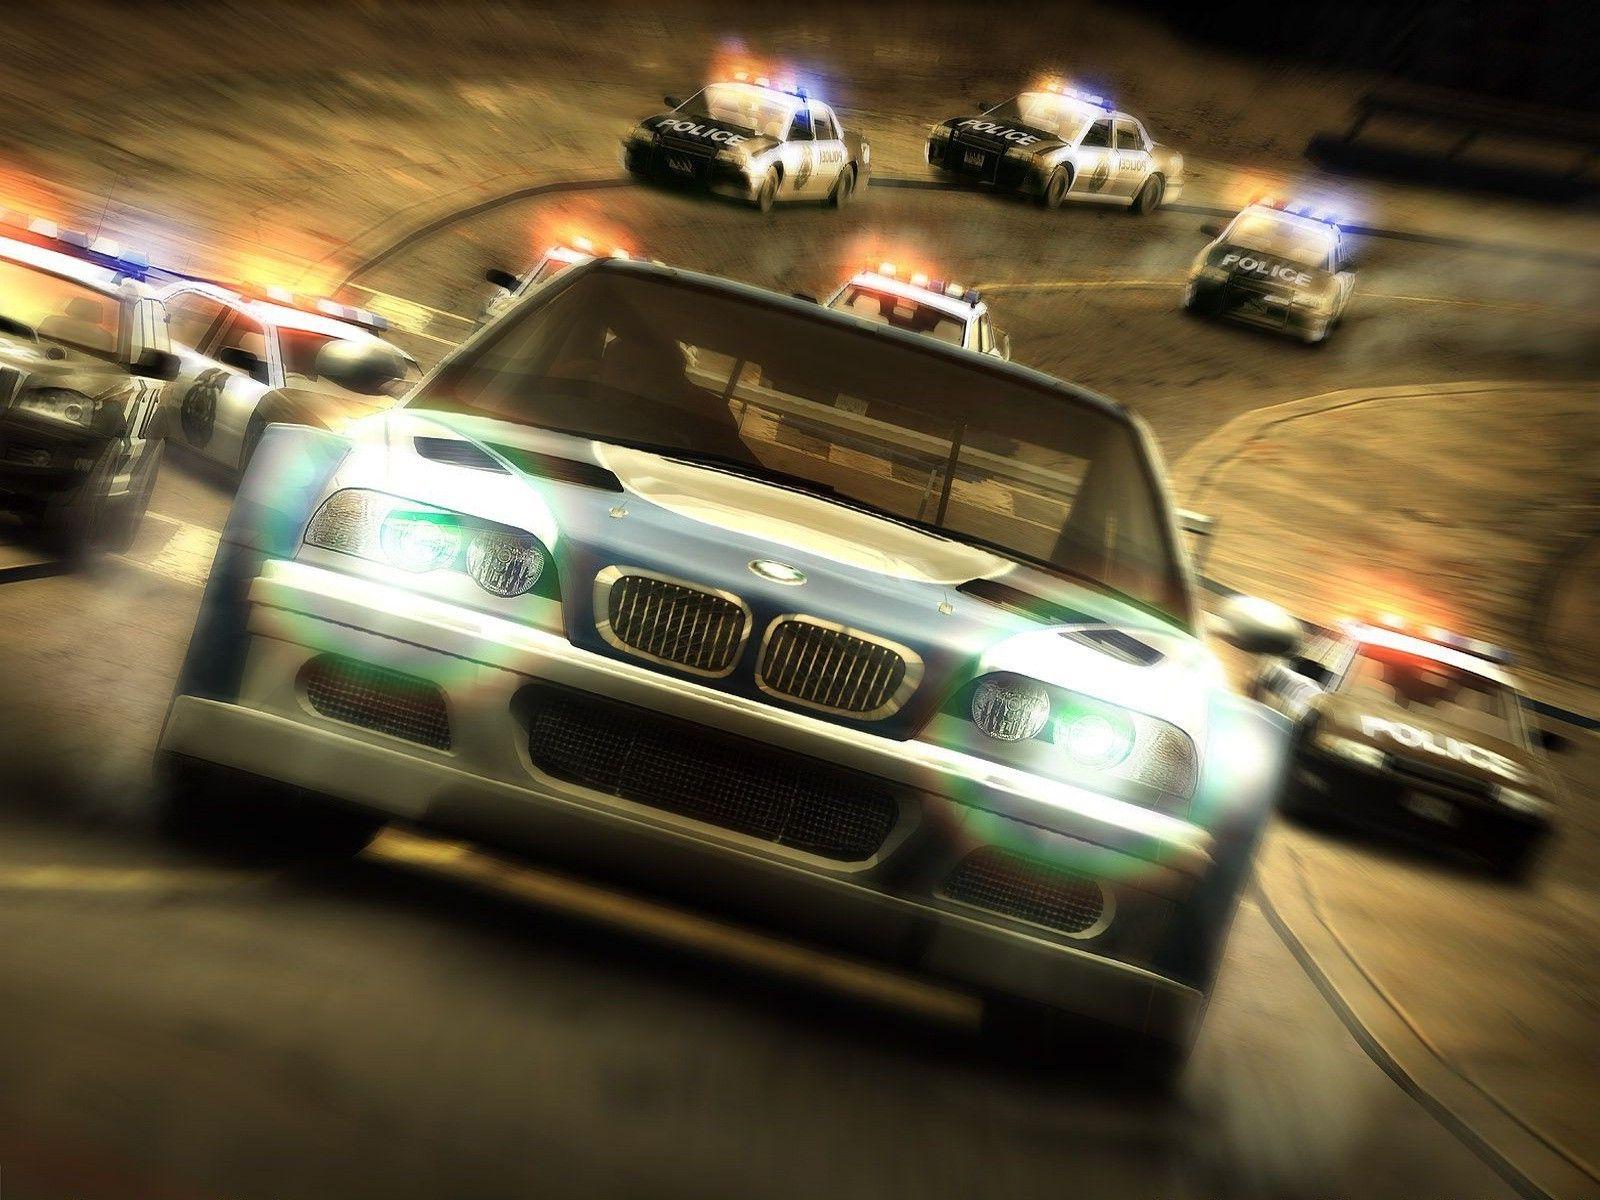 NFS Most Wanted Live Wallpaper: How To Install And Set Up On Your Android  Device – ThemeBin